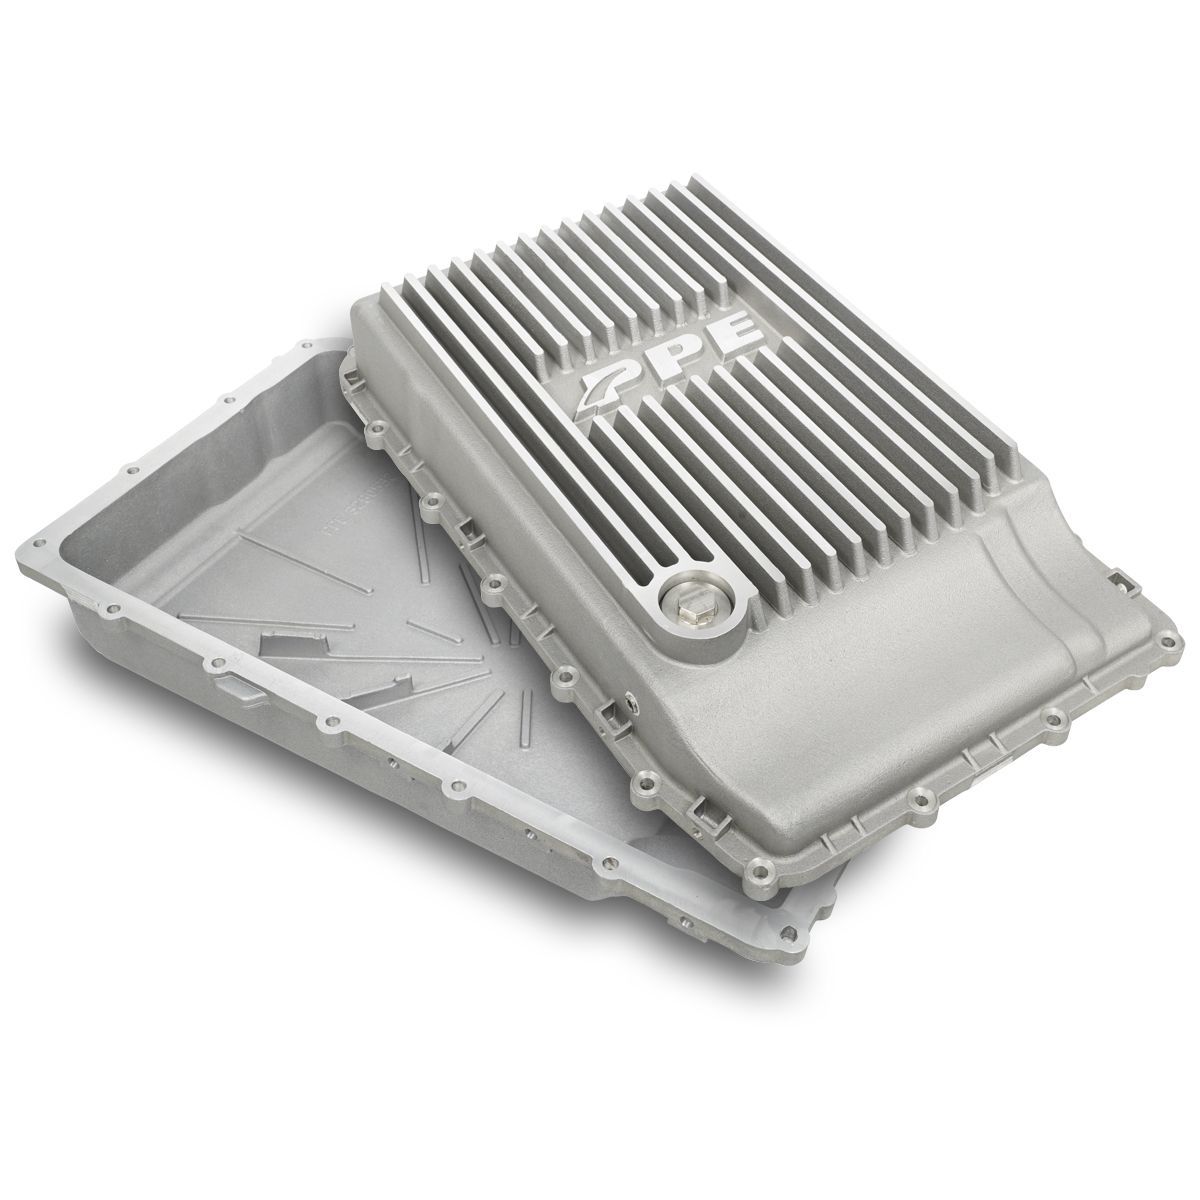 PPE - PPE Raw Heavy Duty Aluminum Transmission Pan For 2021+ Ford Bronco W/ 10R60